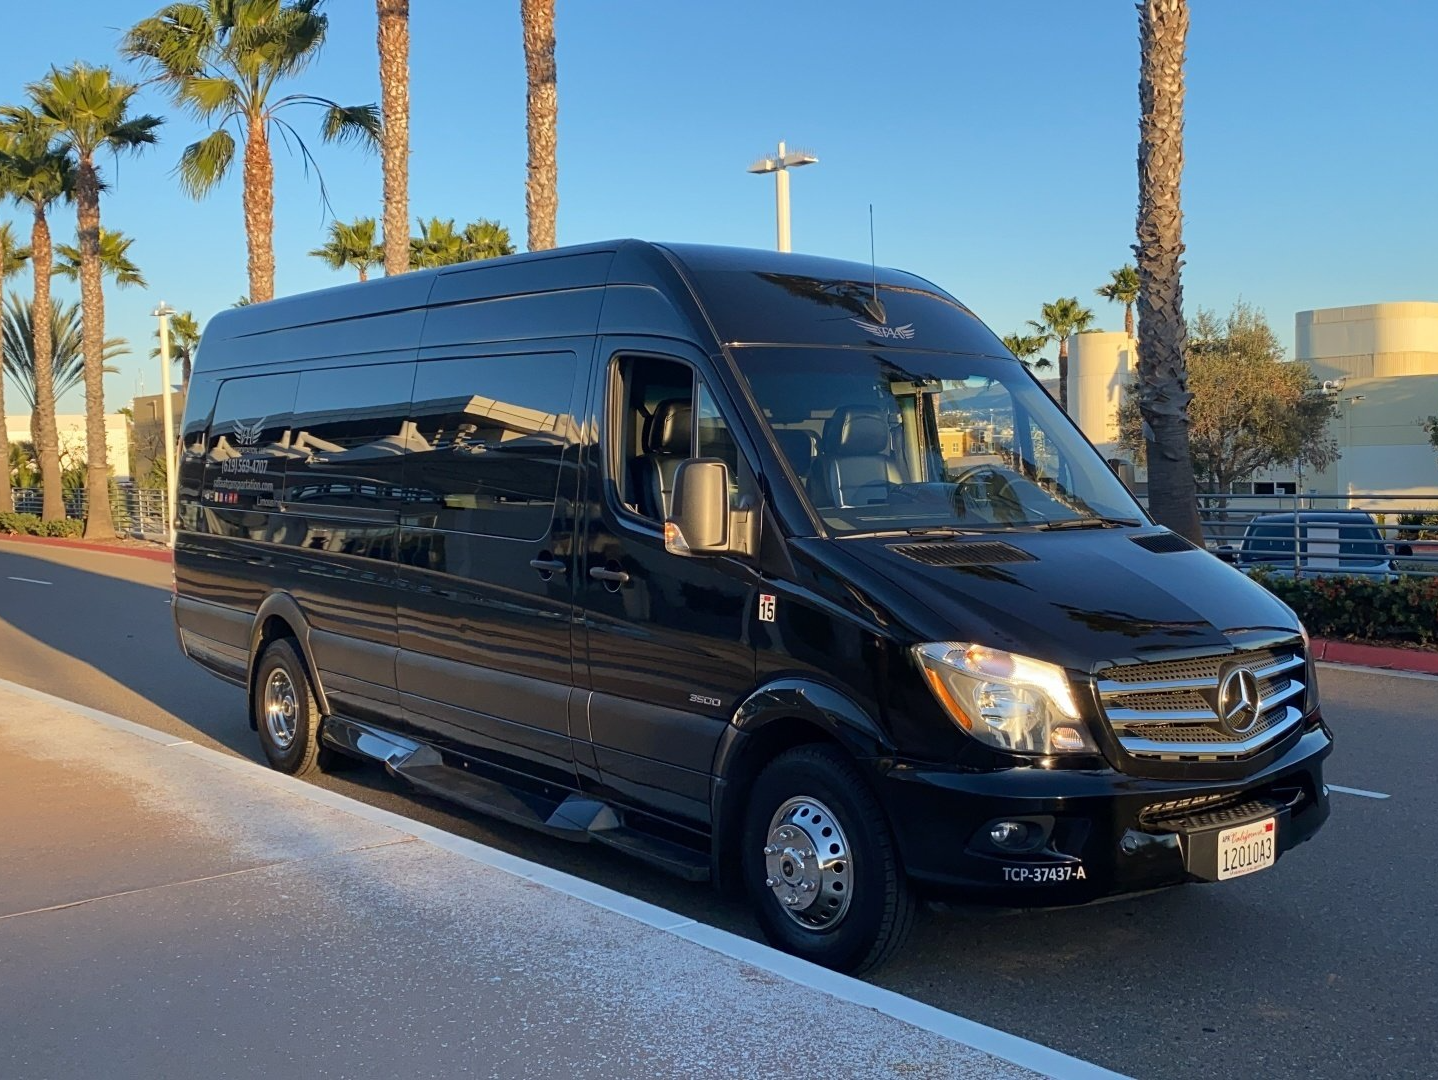 a black van is parked on the side of the road next to palm trees .